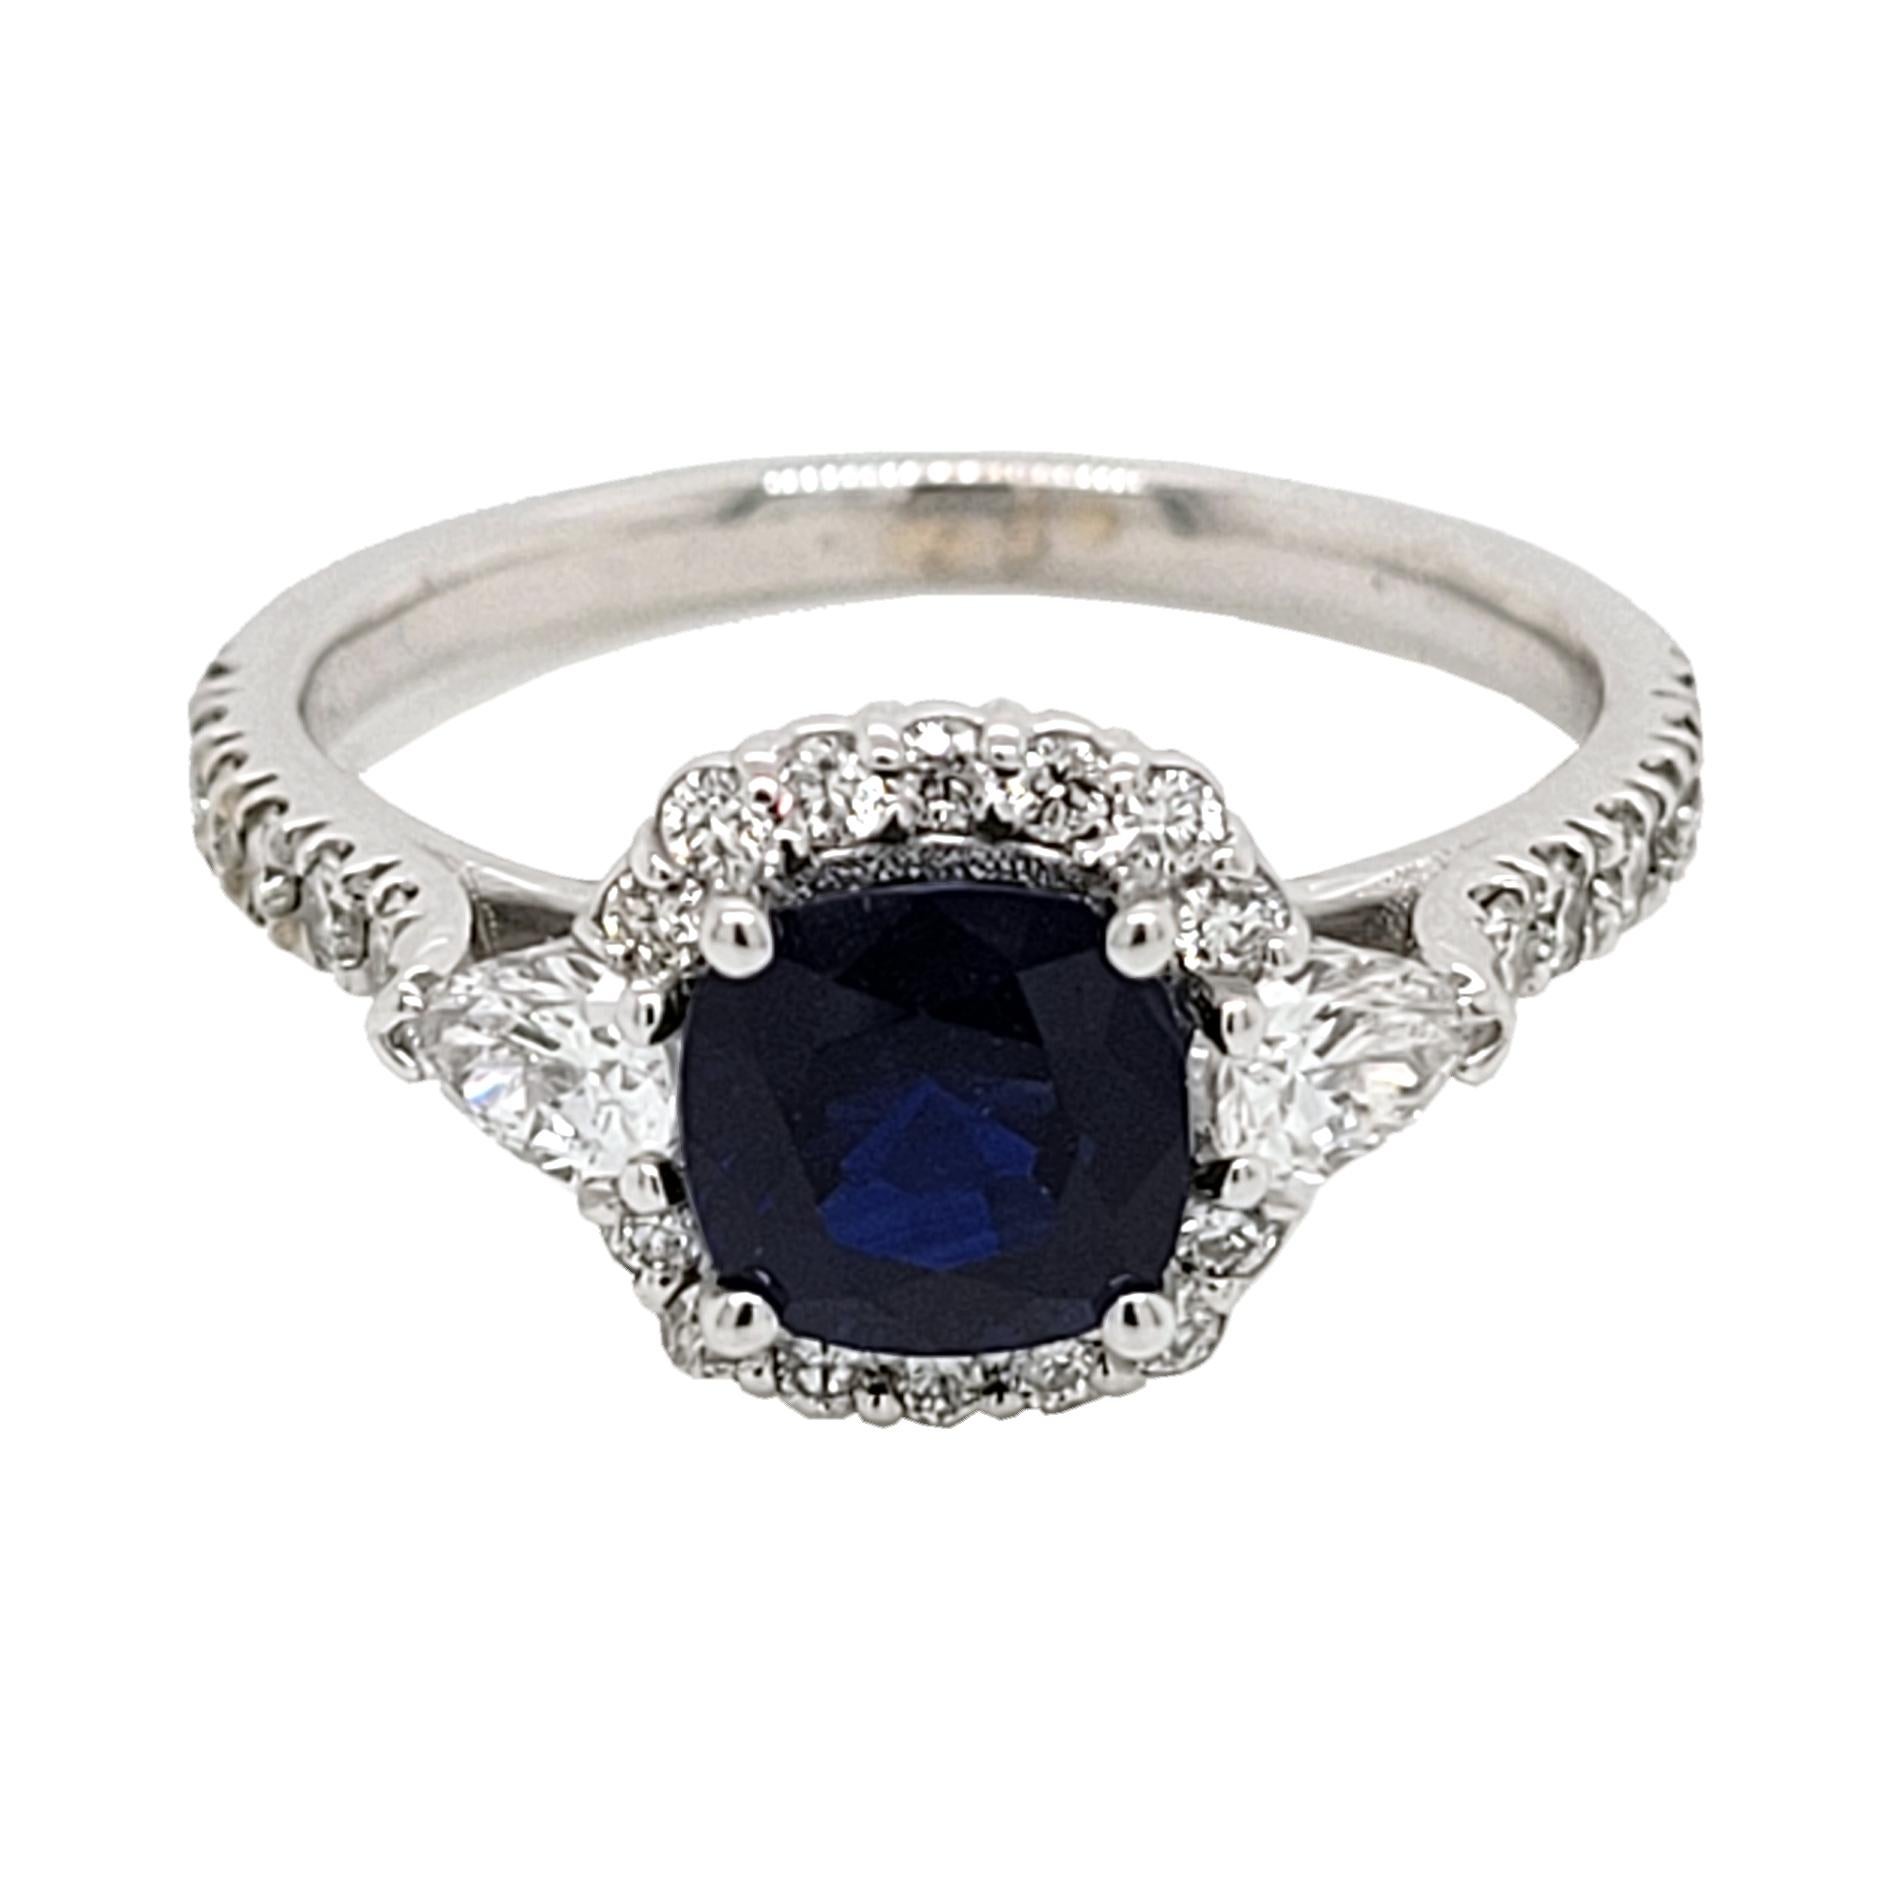 A  Beautiful Color 1.30 Ct Cushion Shaped Sapphire set in a gorgeous 18k gold  Pave set engagement Ring with halo and two pear shape diamonds on the side. Total diamond weight of 0.64 Ct. diamonds on the side. 

Center stone: 1.27 Ct Cushion Shape